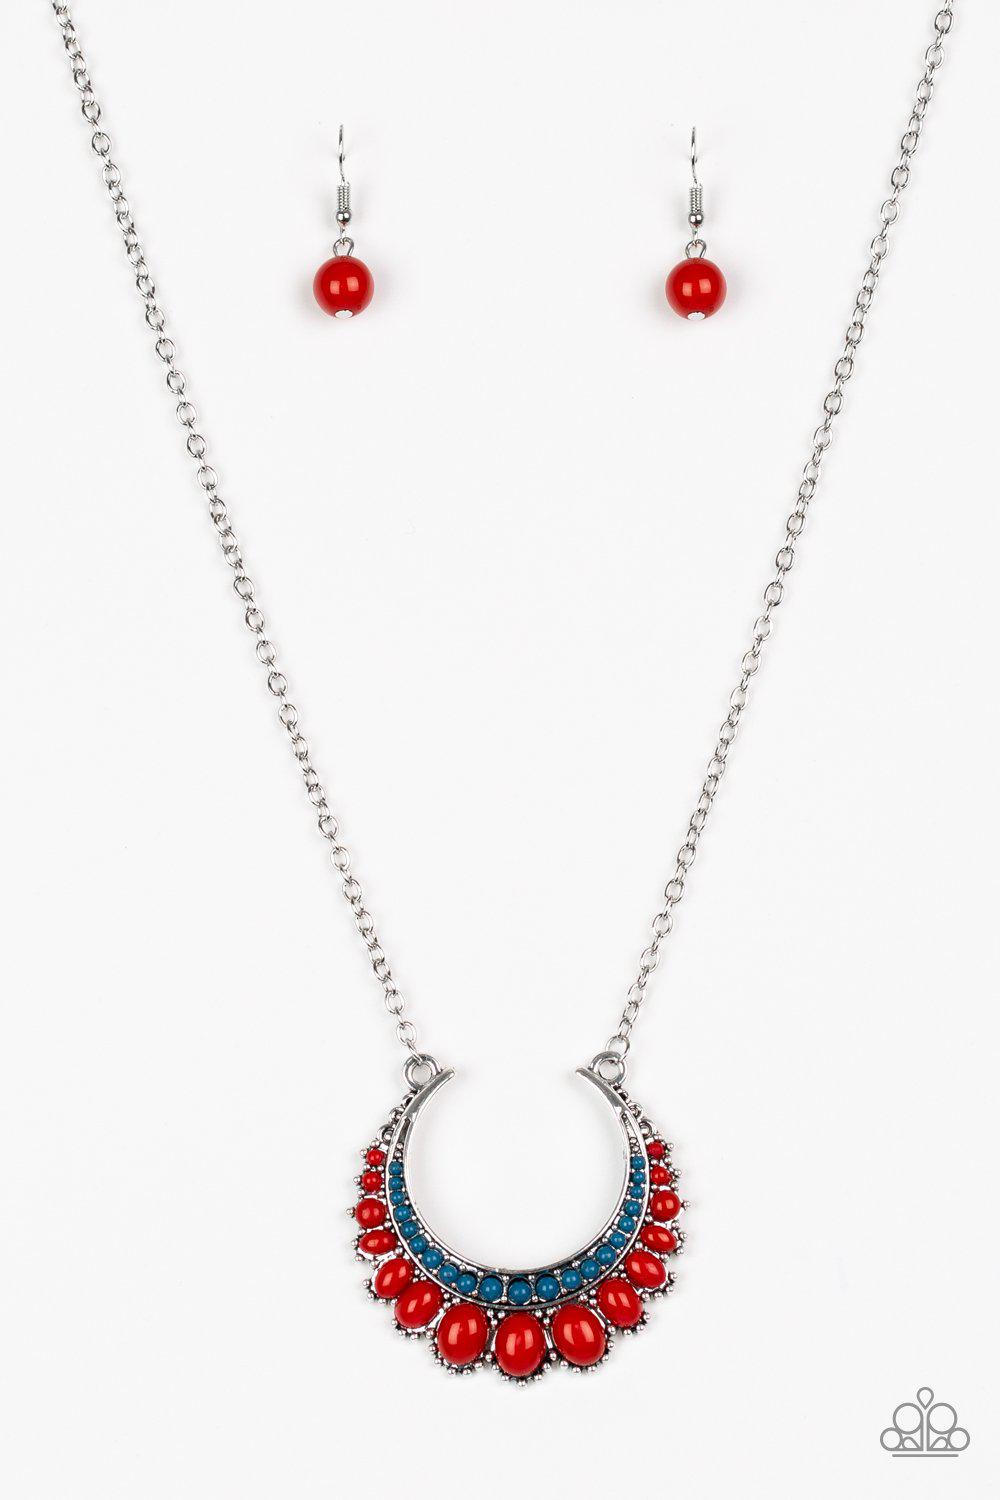 Count To Zen Multi - Red and Blue Necklace - Paparazzi Accessories-CarasShop.com - $5 Jewelry by Cara Jewels